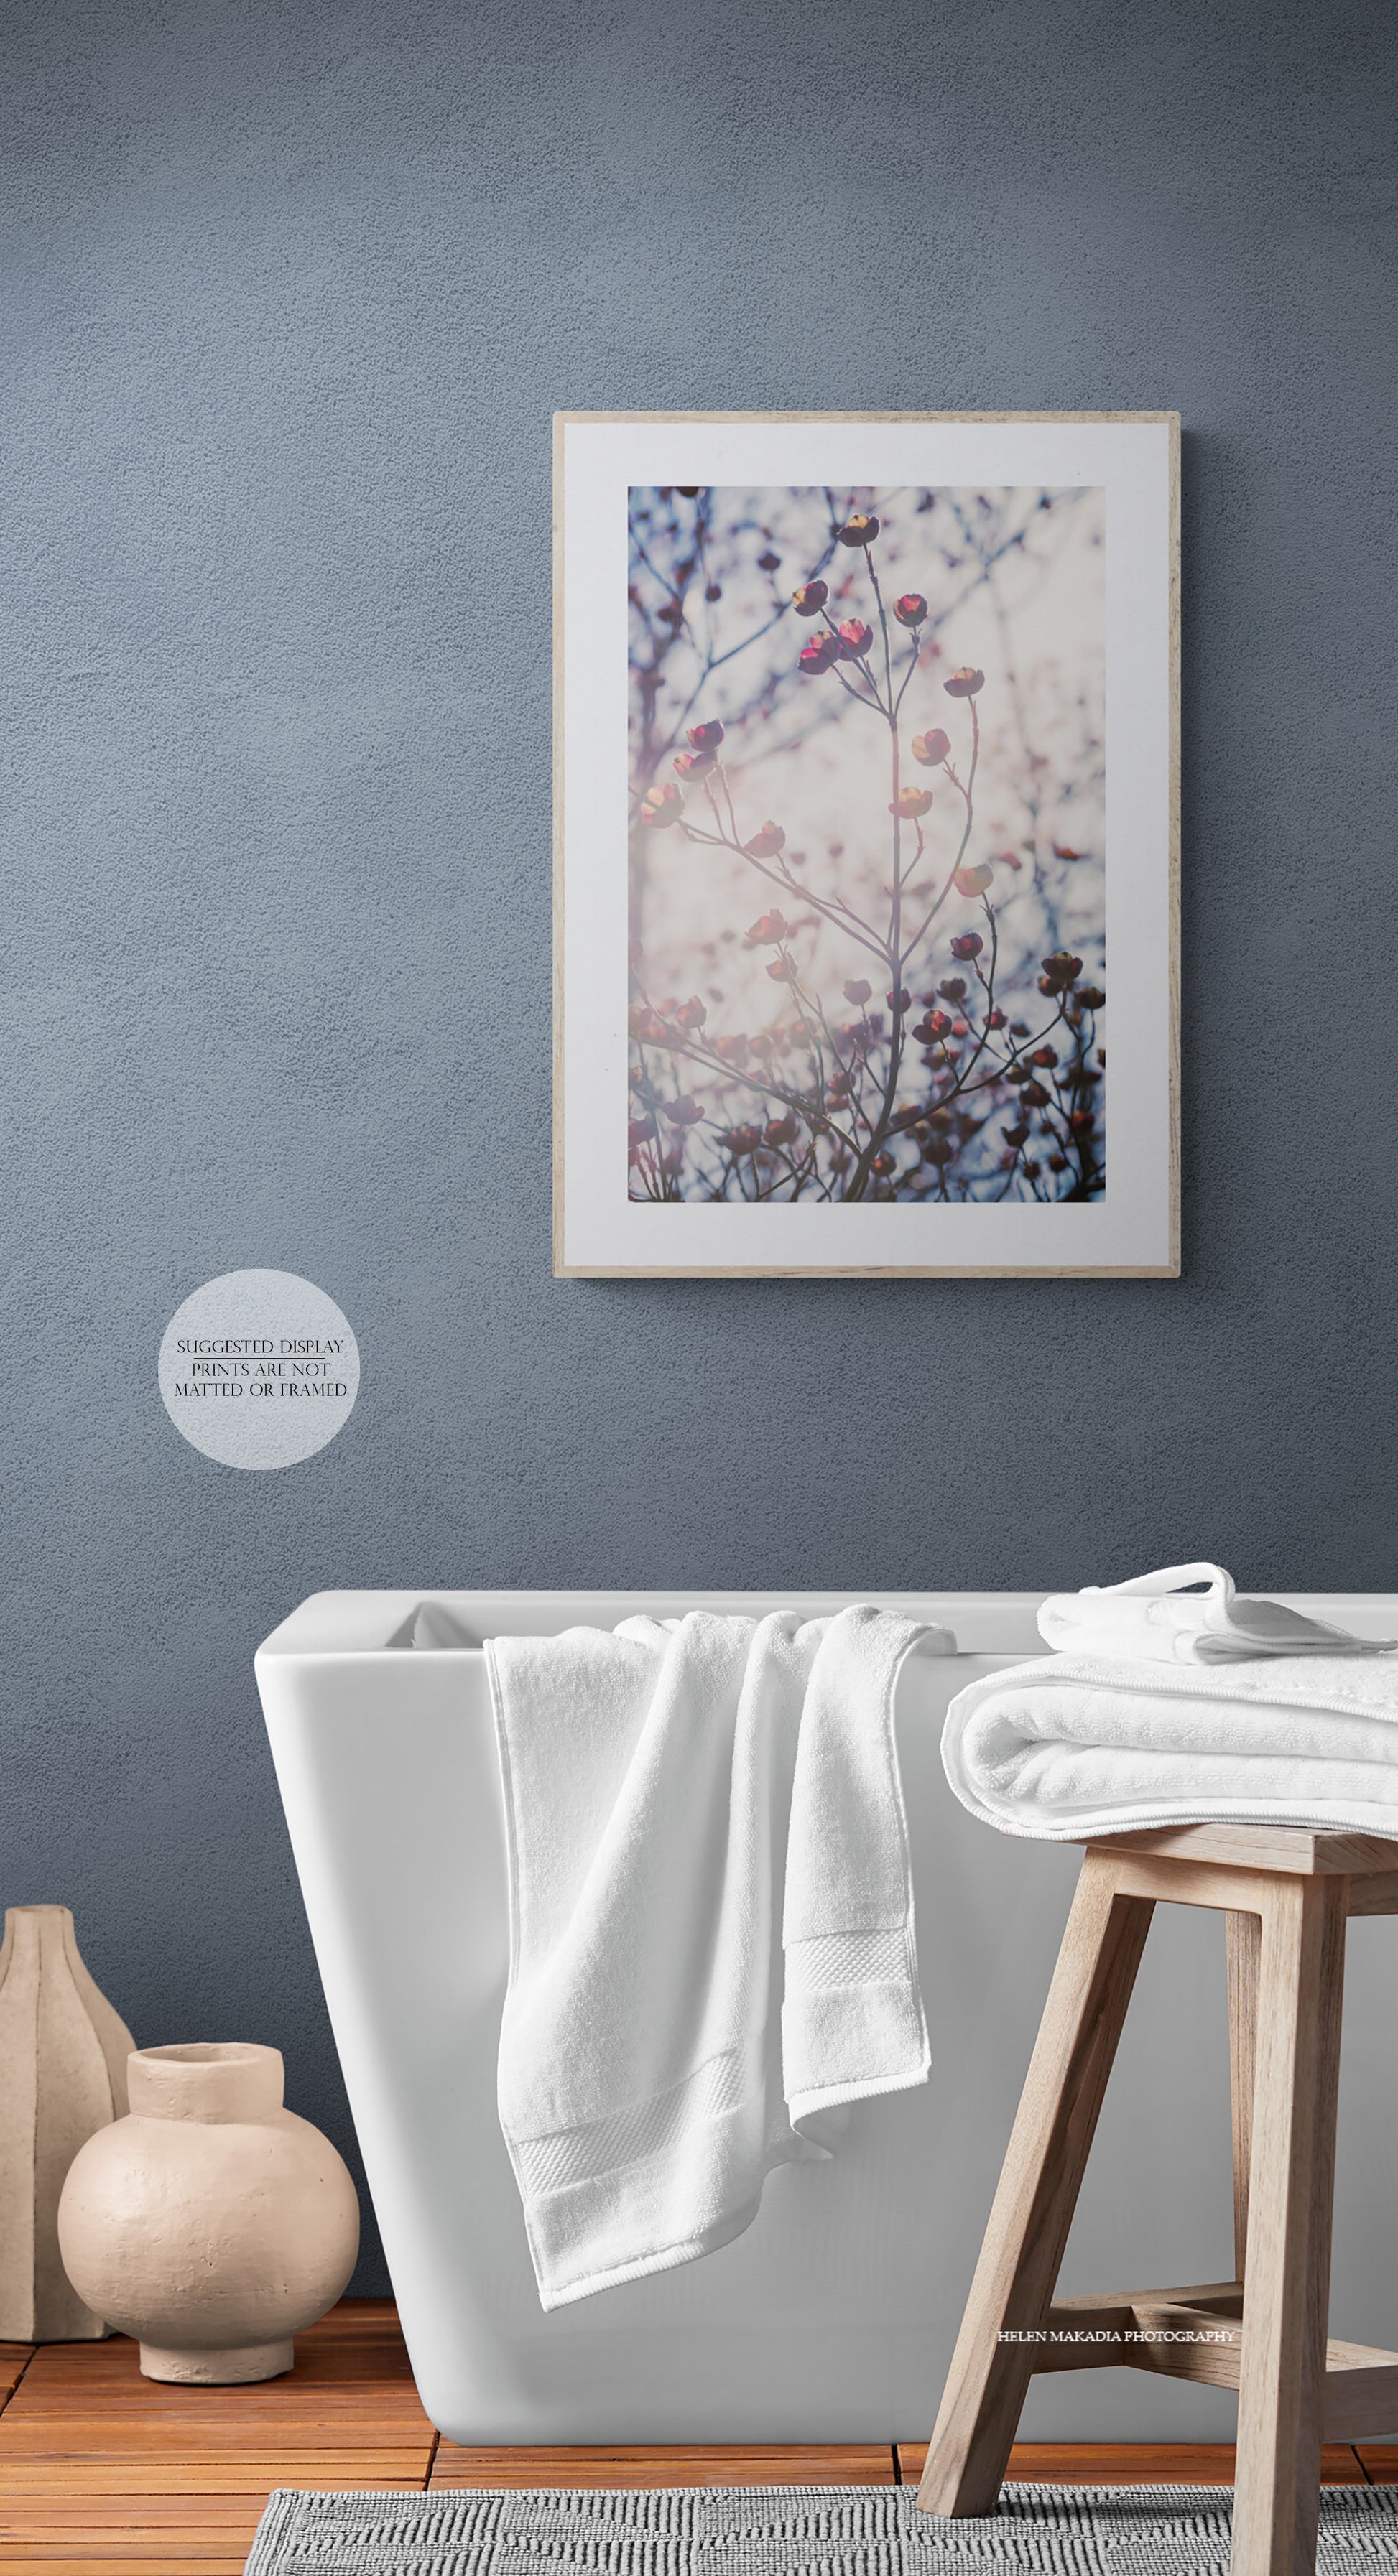 Sunlit pink dogwood blooms photograph as wall art in a bathroom